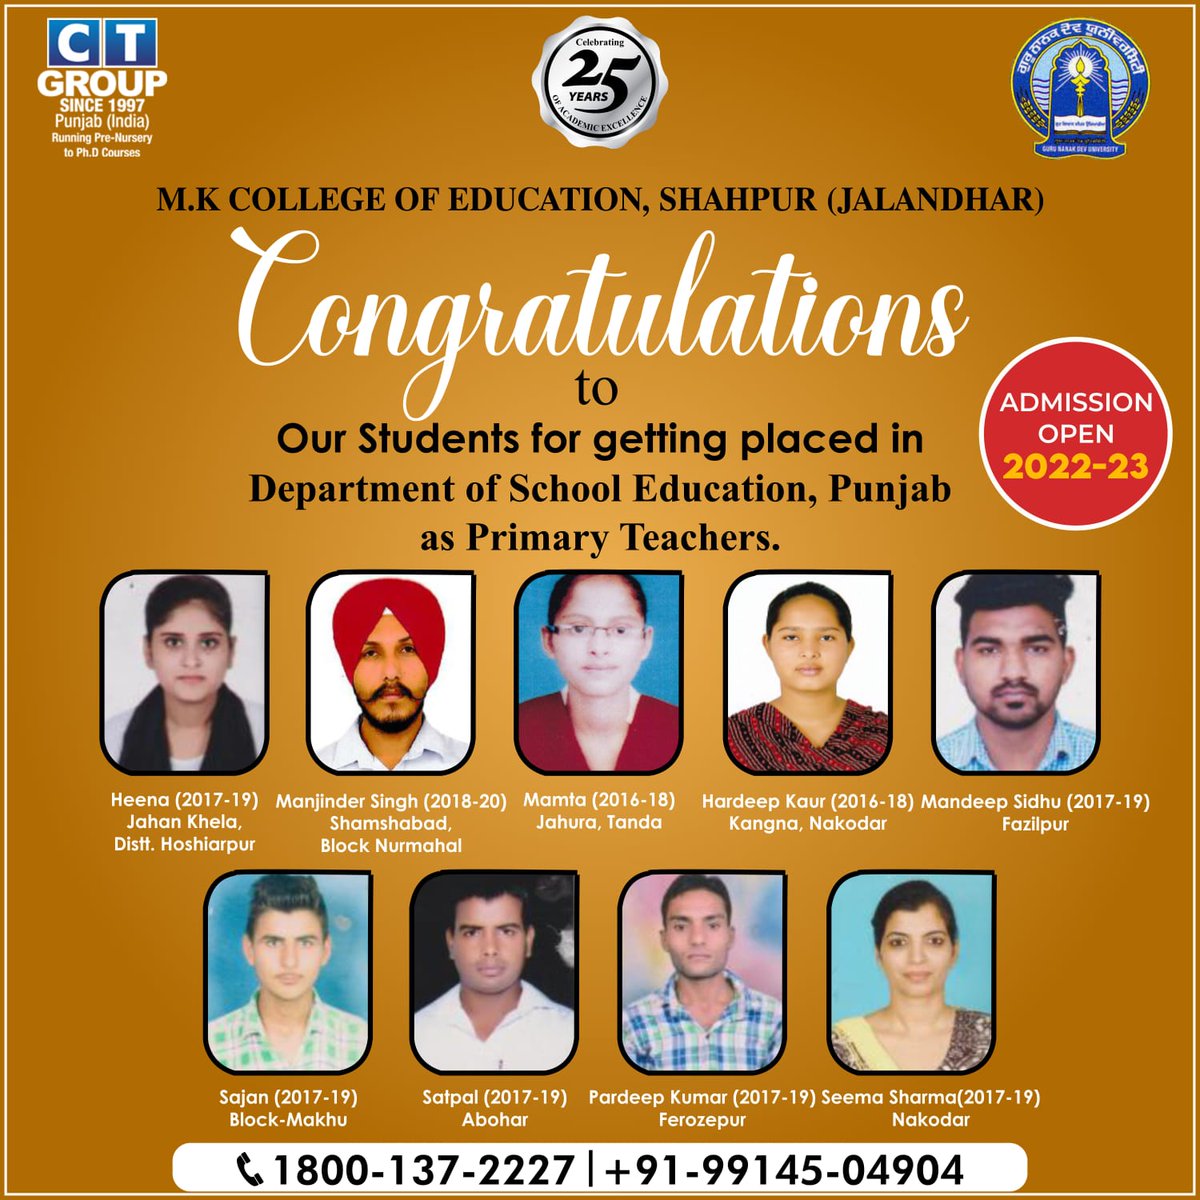 MK College of Education, Shahpur, congratulates its students for getting placed in the Department of School Education, Punjab as Primary Teachers.

#CTG #ctgroupofinstitutions #BestCollegeinJalandhar #punjabtopinstitute #punjabeducation #placement